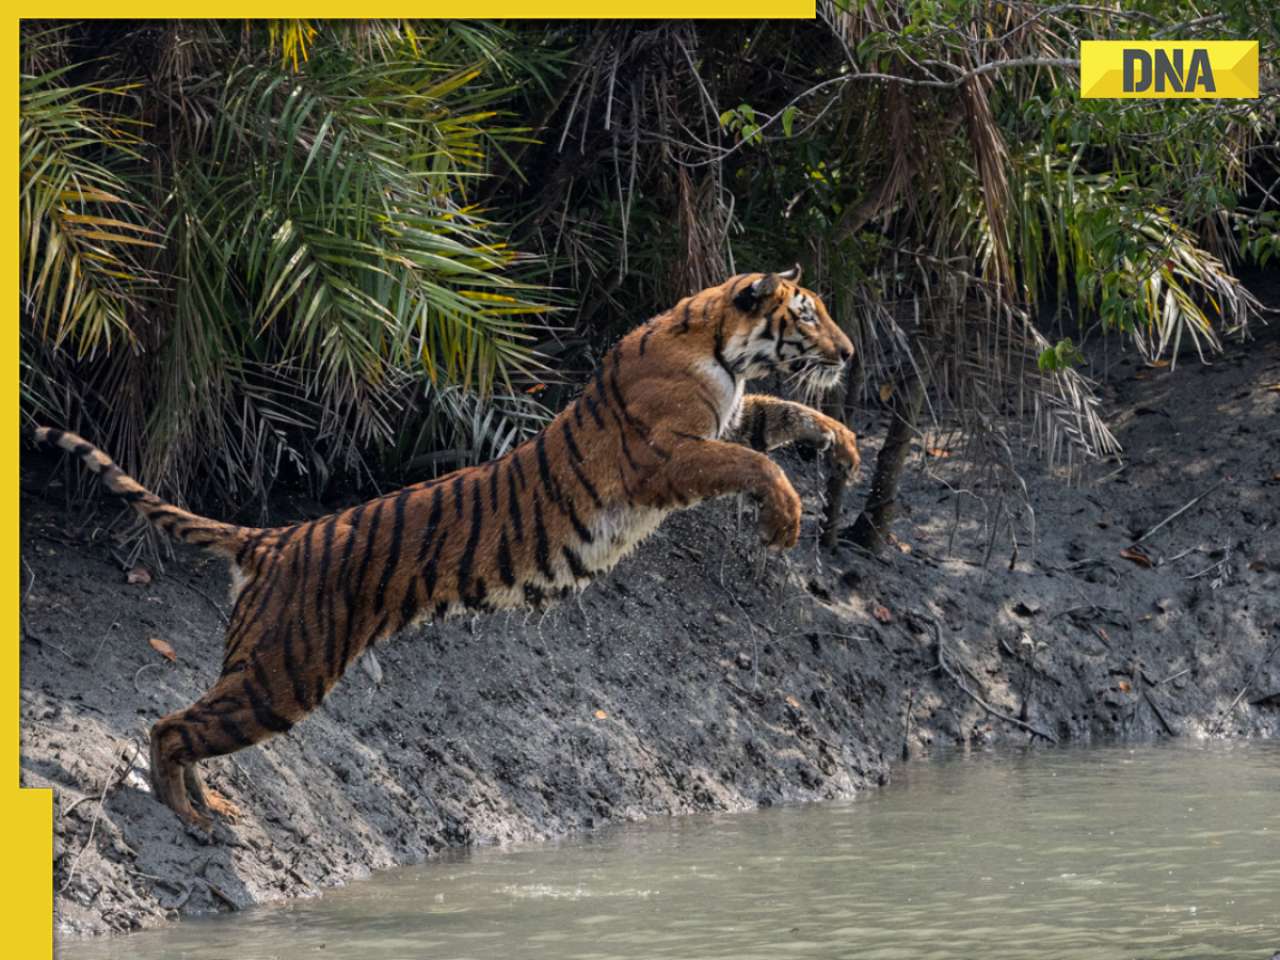 Viral video: This 'once in a lifetime shot' of tiger’s majestic leap will make your jaw drop, watch